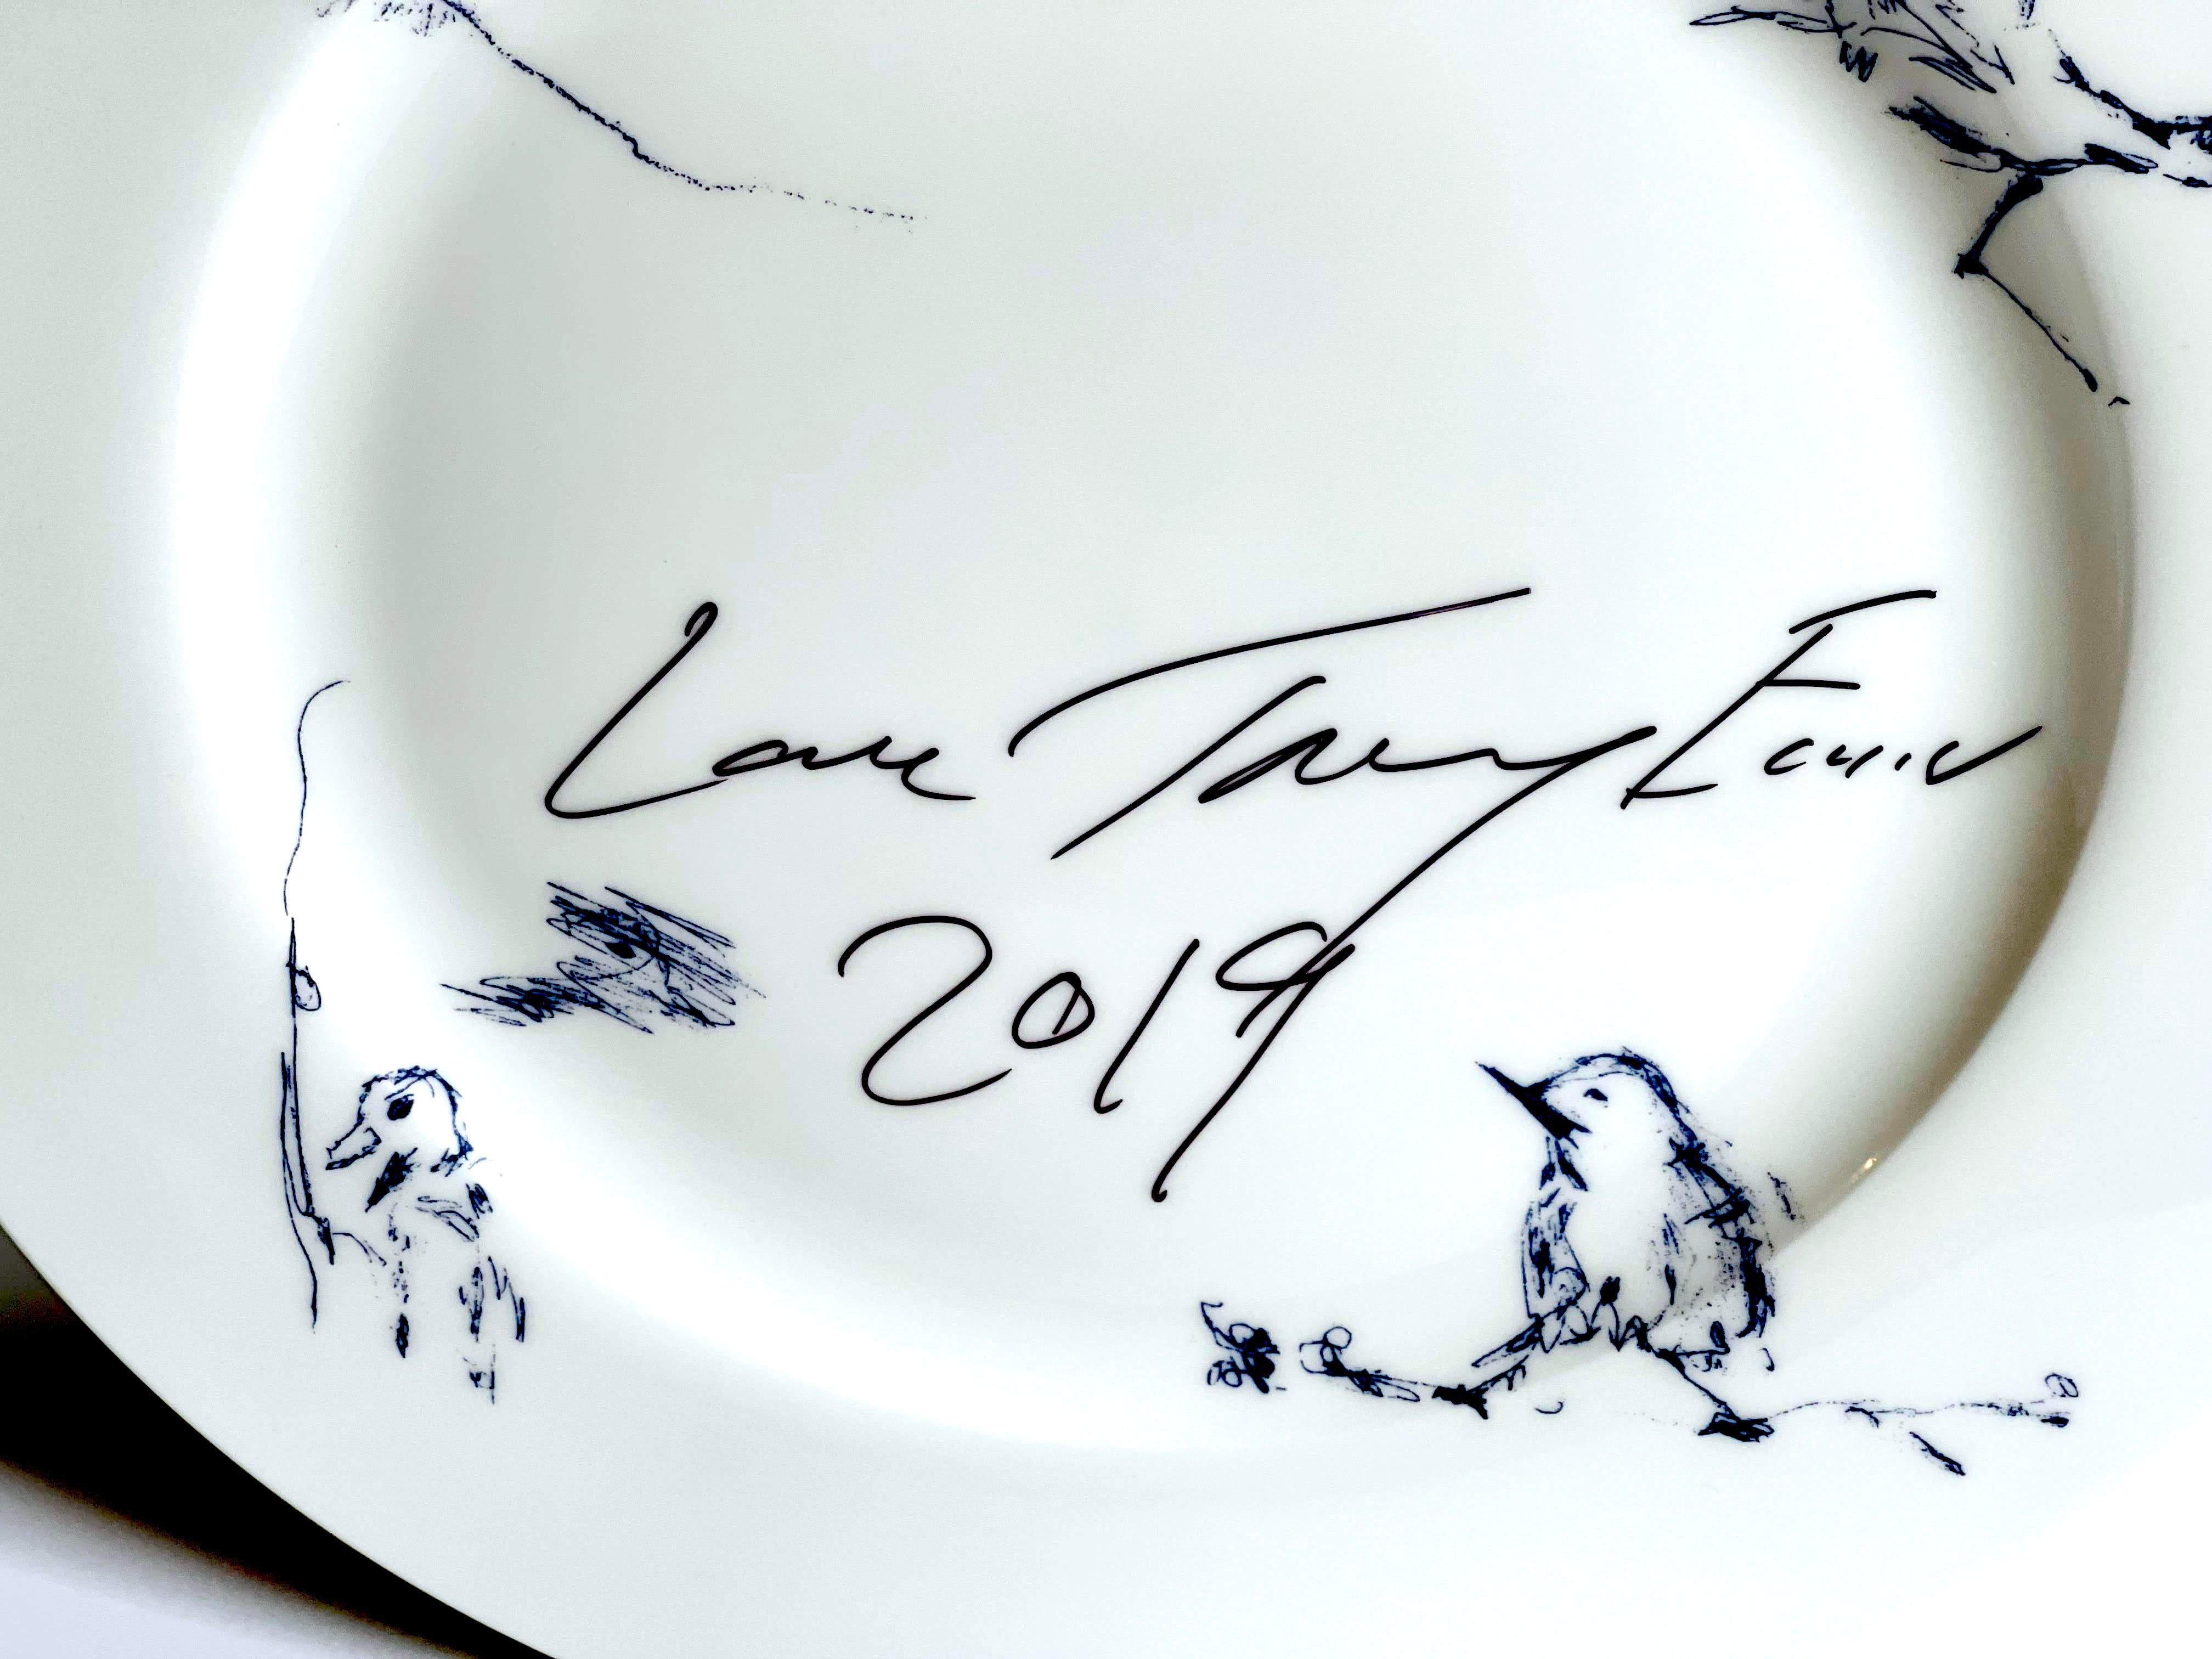 Tracey Emin
Docket and His Bird Collection plate (uniquely hand signed and inscribed by Tracey Emin), 2019
Fine Bone China (Hand signed, warmly inscribed and and dated)
Signed and dated by Tracey Emin: 